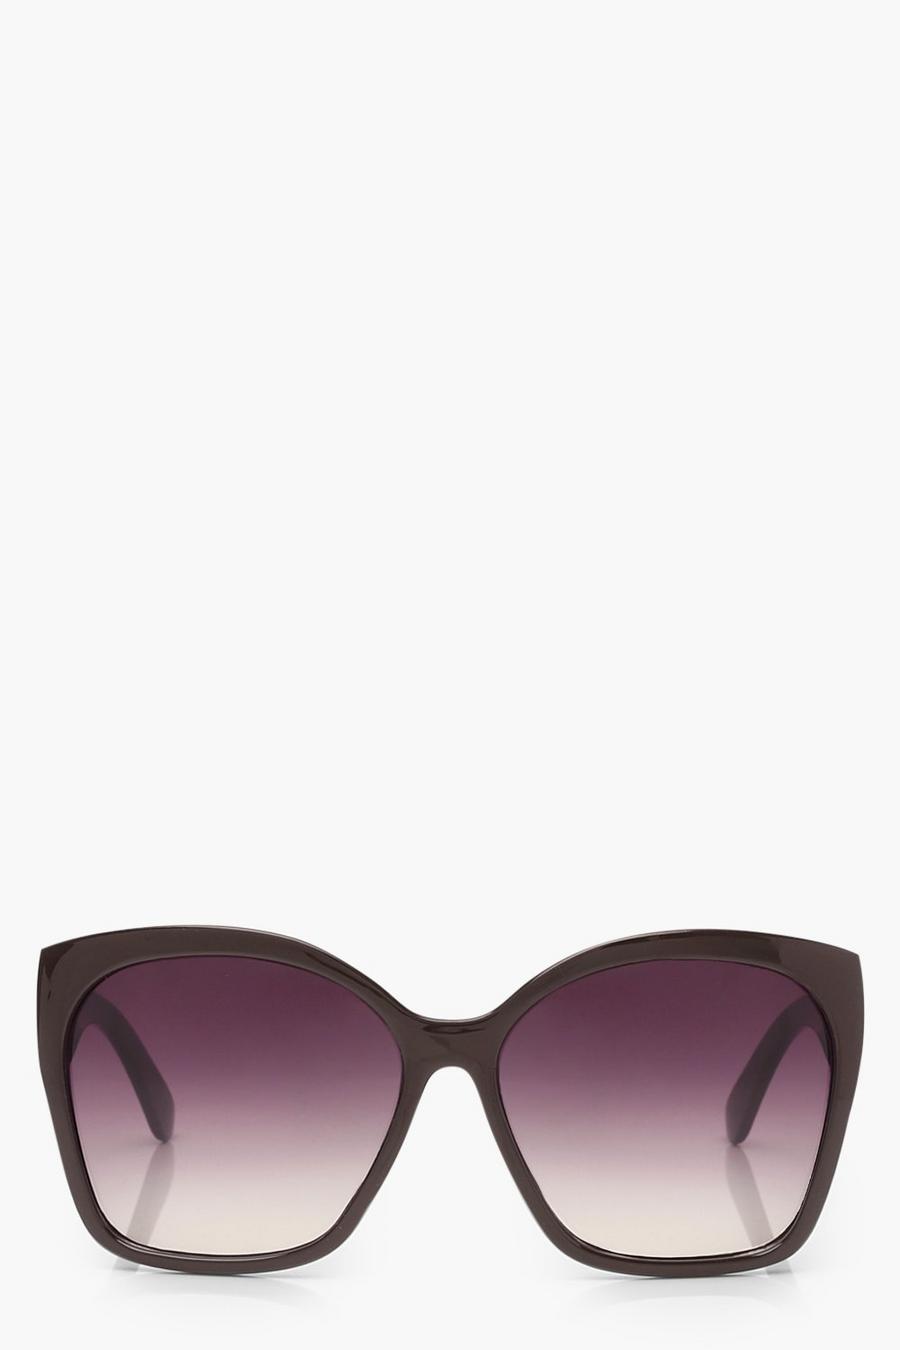 Chocolate brown Oversized Classic Sunglasses image number 1